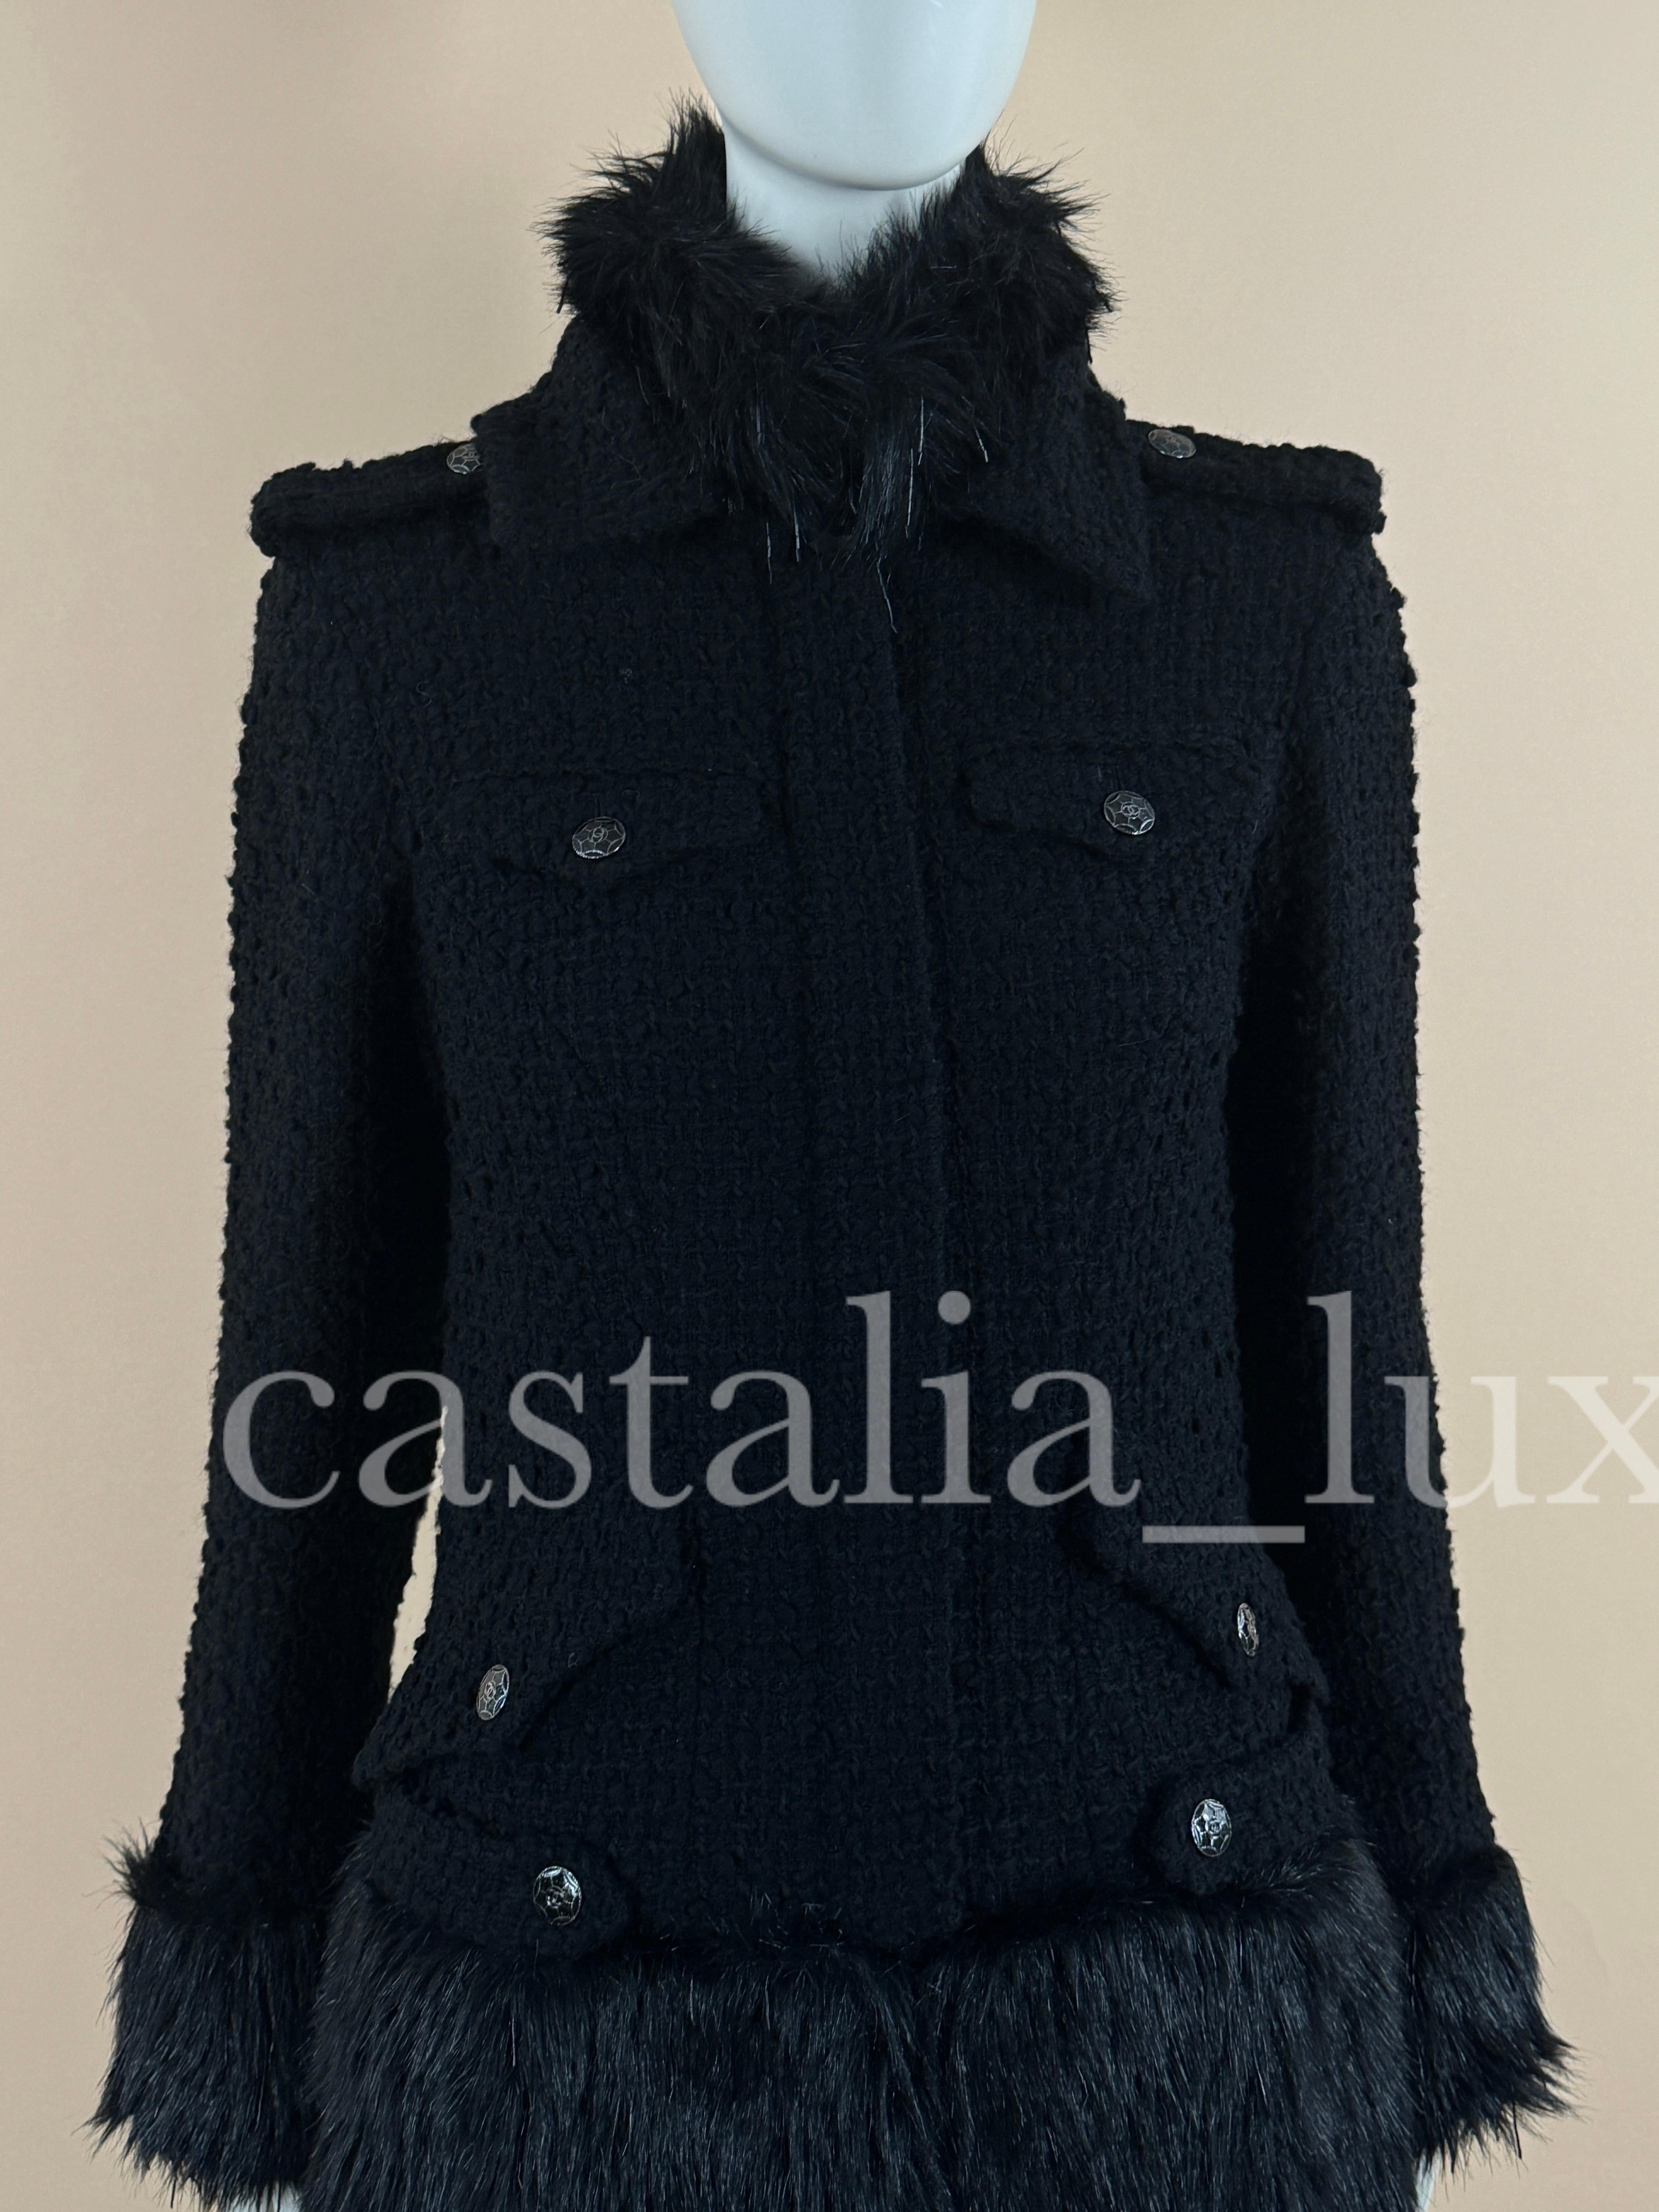 Chanel Jewel Embellishment Black Tweed Coat with Faux Fur Details In New Condition For Sale In Dubai, AE